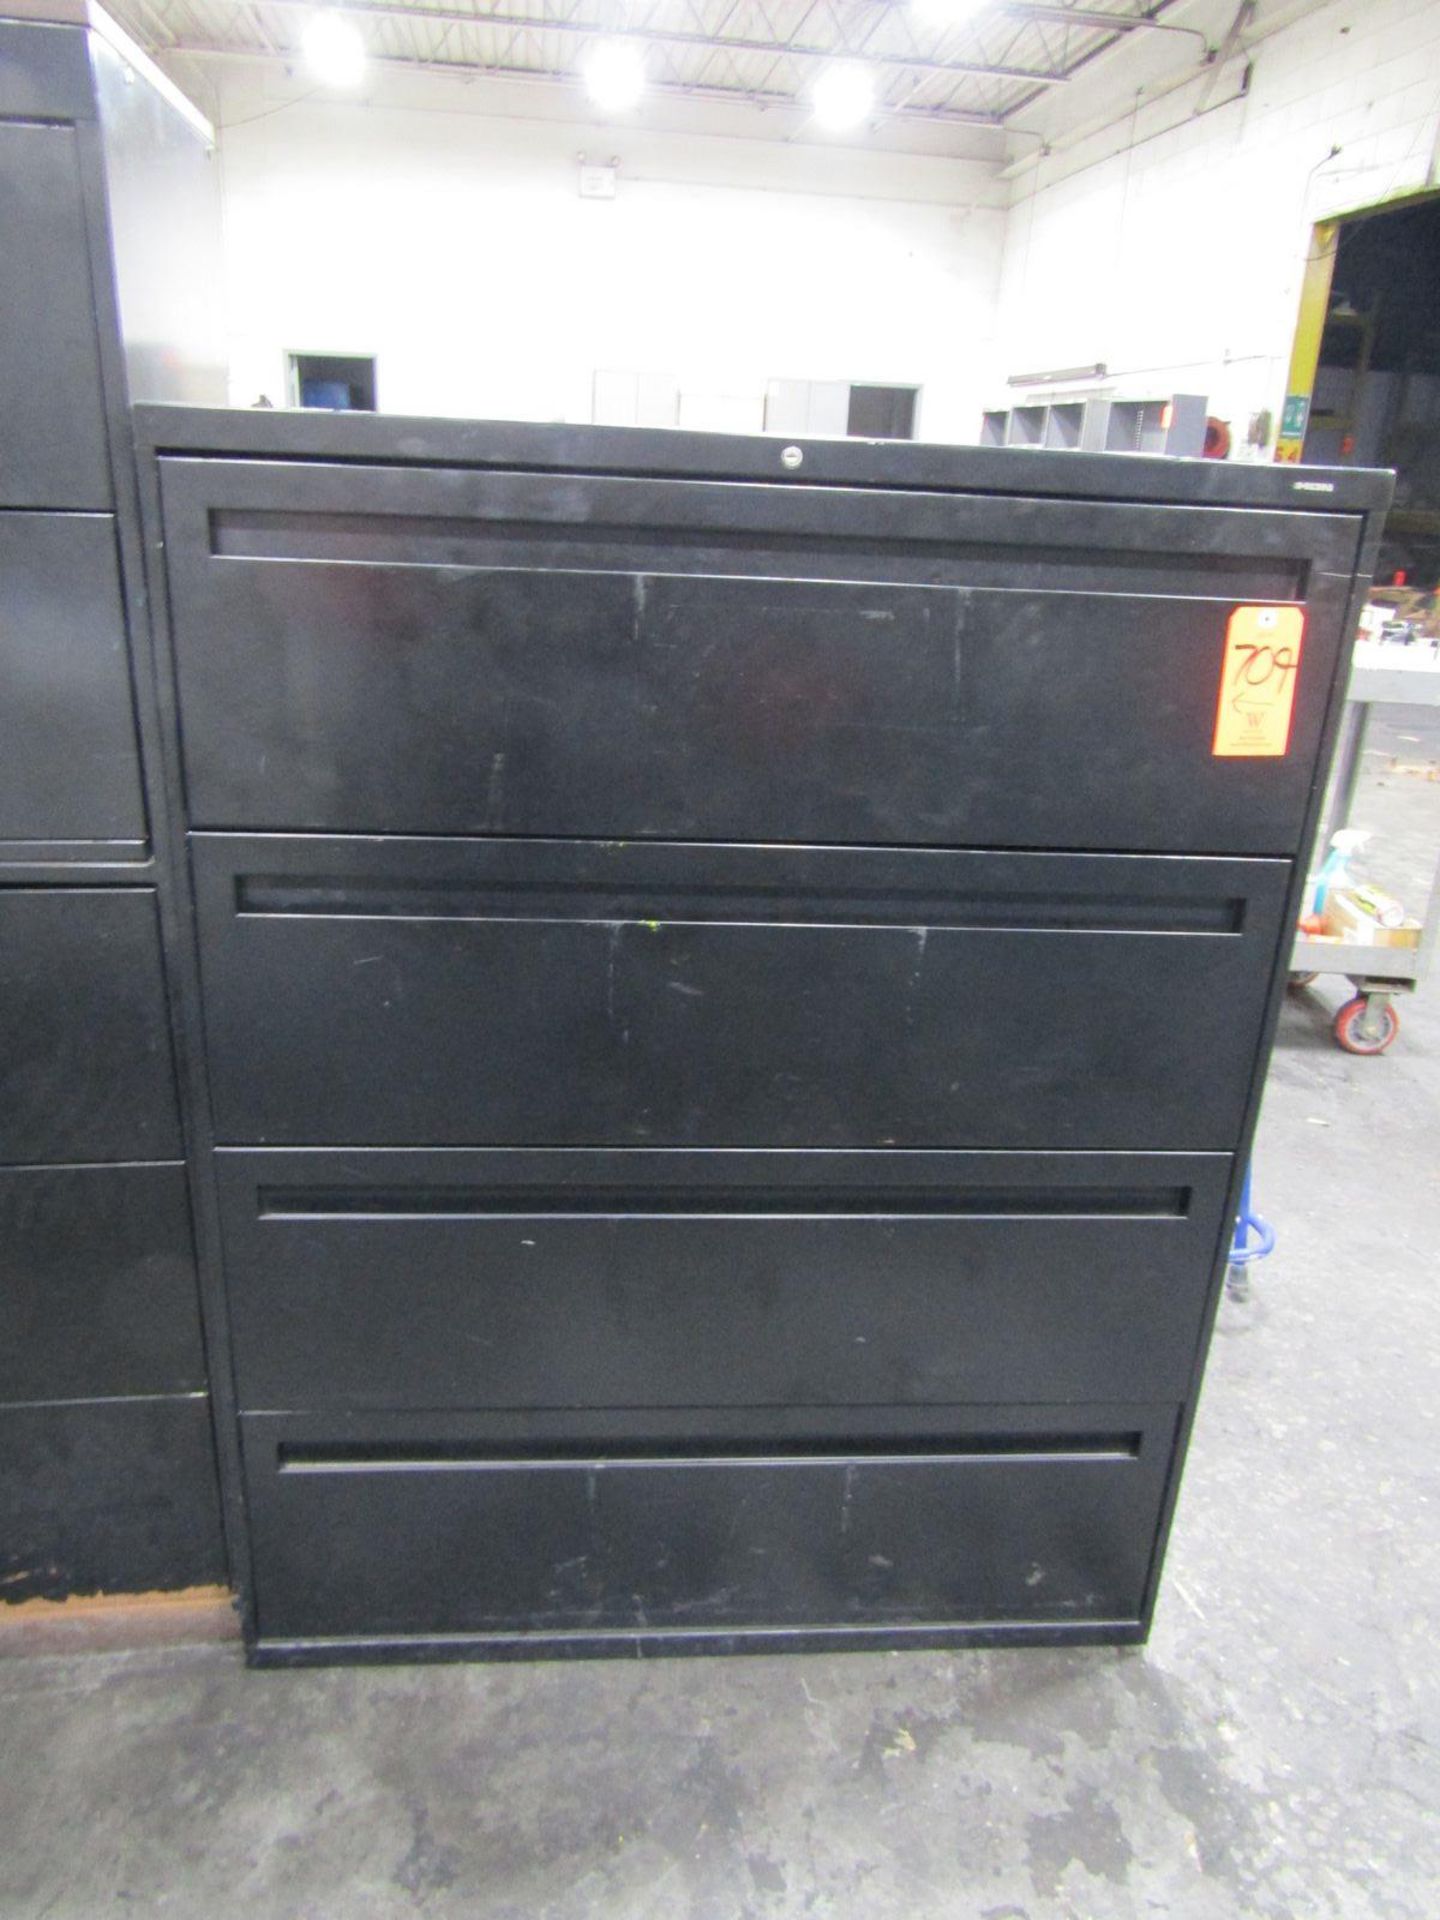 Lot - Shop Furniture, to Include: (2) 5-Drawer Lateral Filing Cabinets, (1) 4-Drawer Lateral - Image 10 of 12